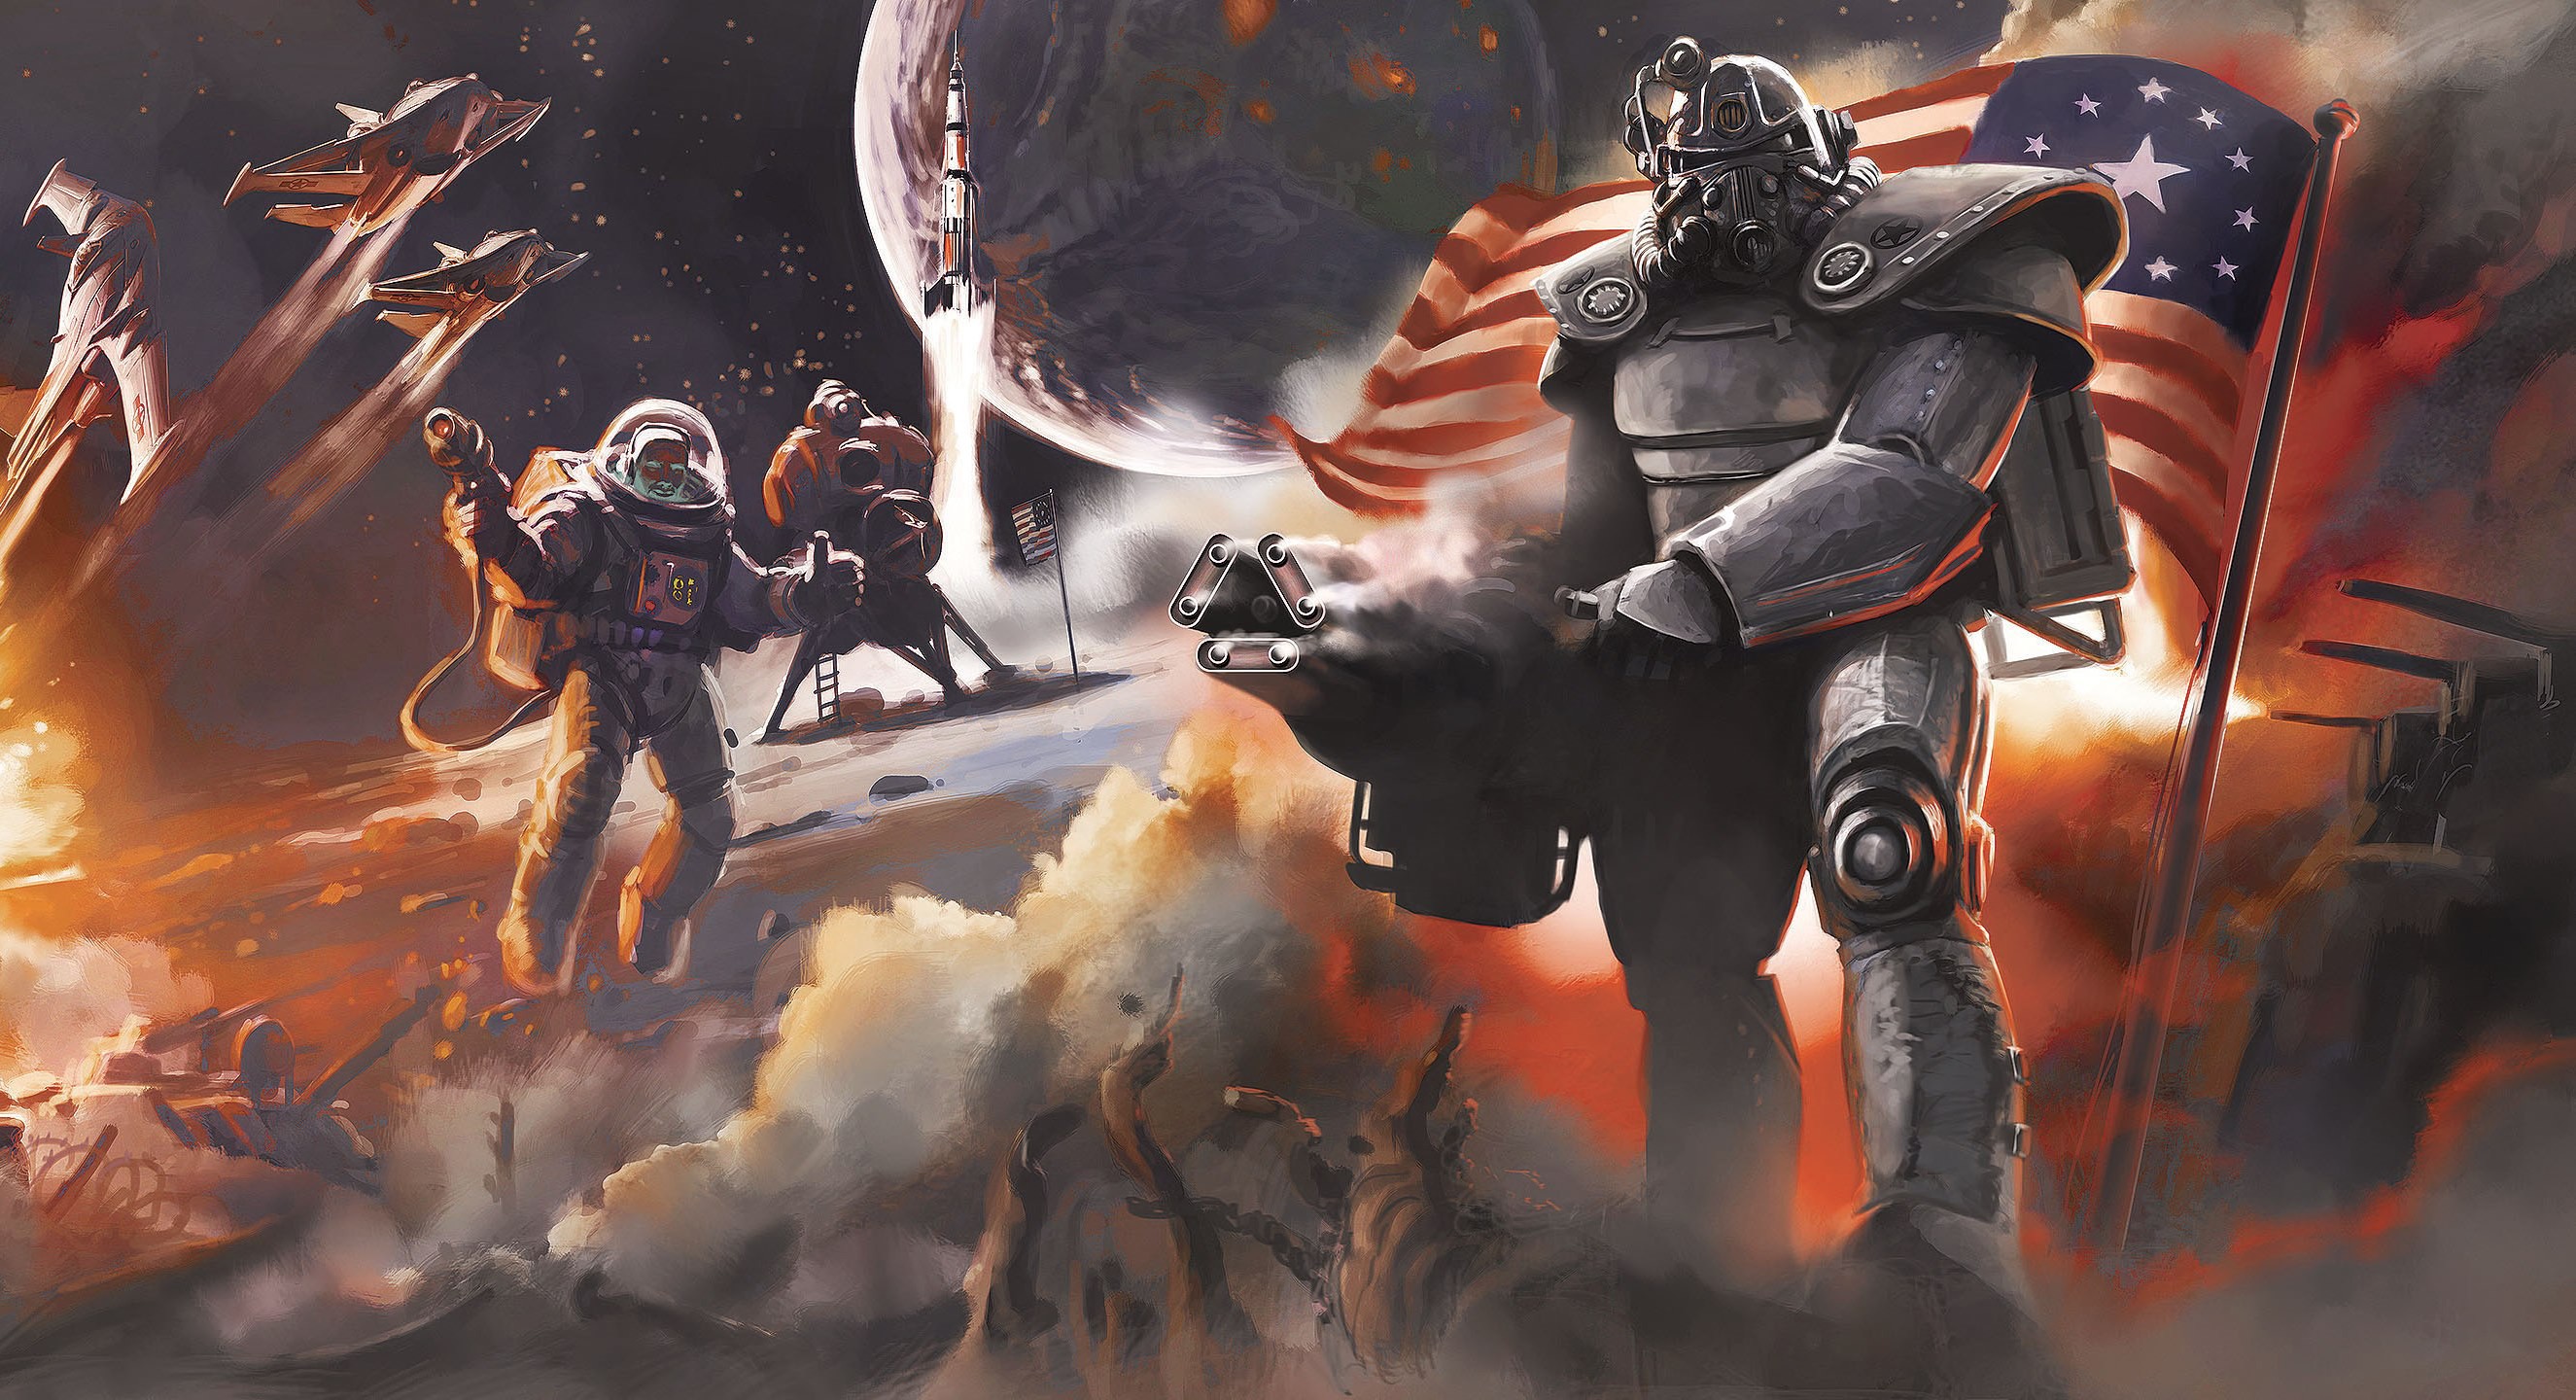 General 2650x1440 Fallout 4 Bethesda Softworks Brotherhood of Steel nuclear apocalyptic video games Fallout power armor PC gaming video game art flag planet space futuristic armor